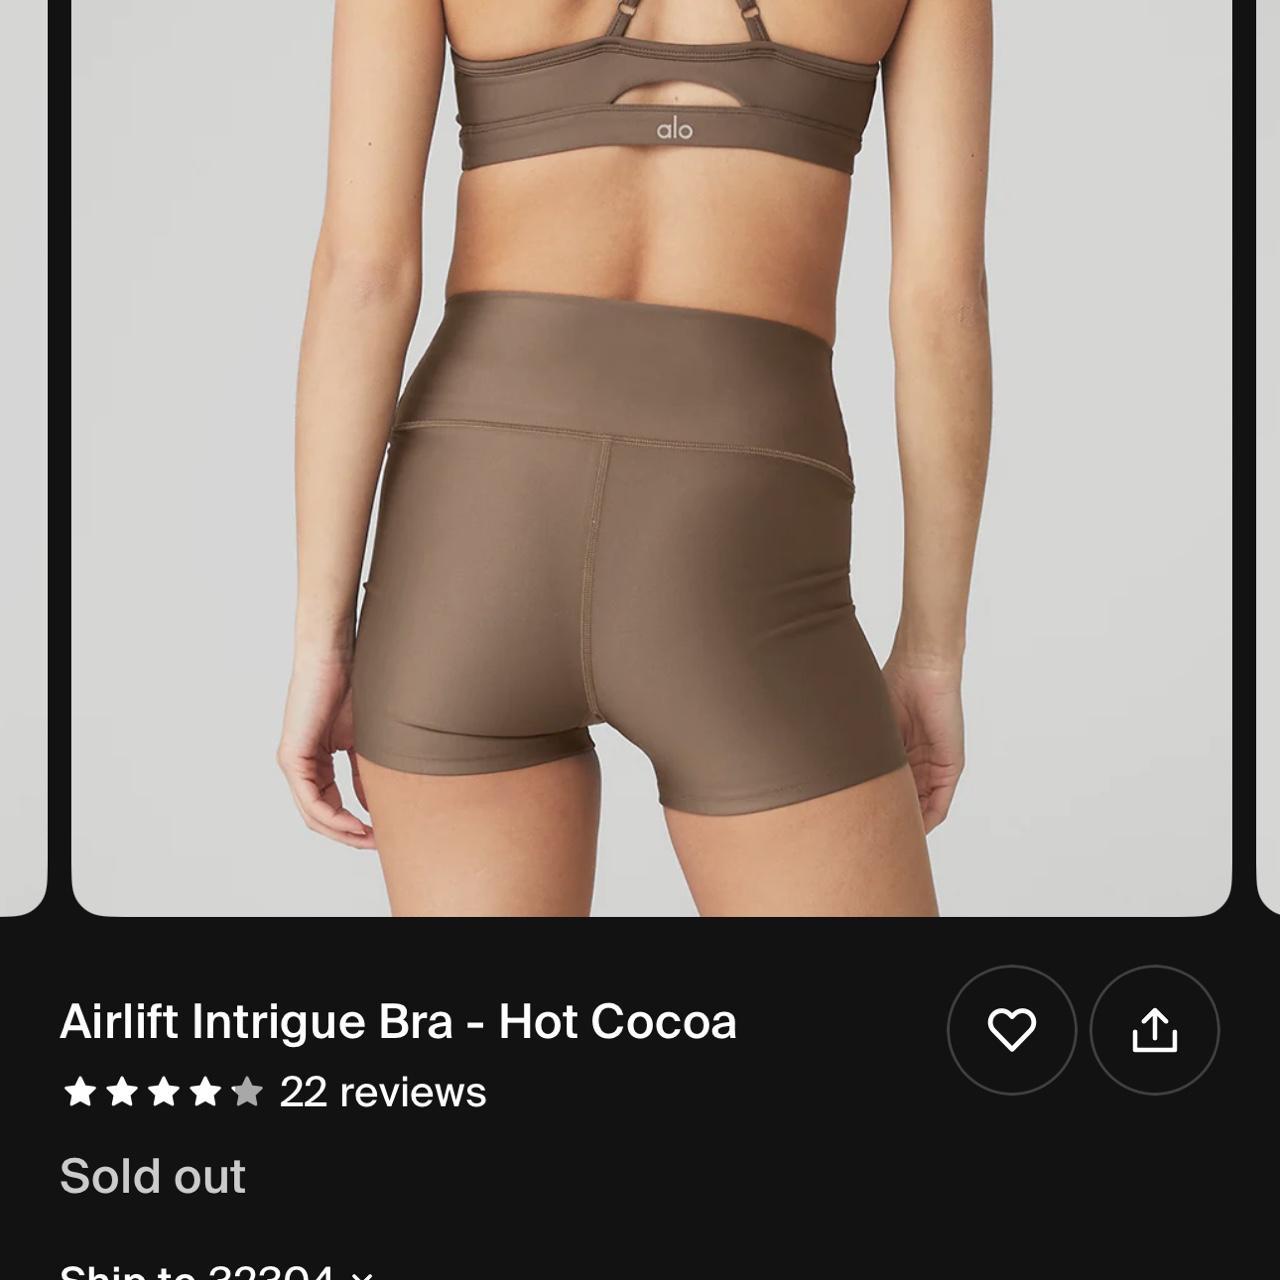 Alo yoga airlift set - hot cocoa size XS. Sold out